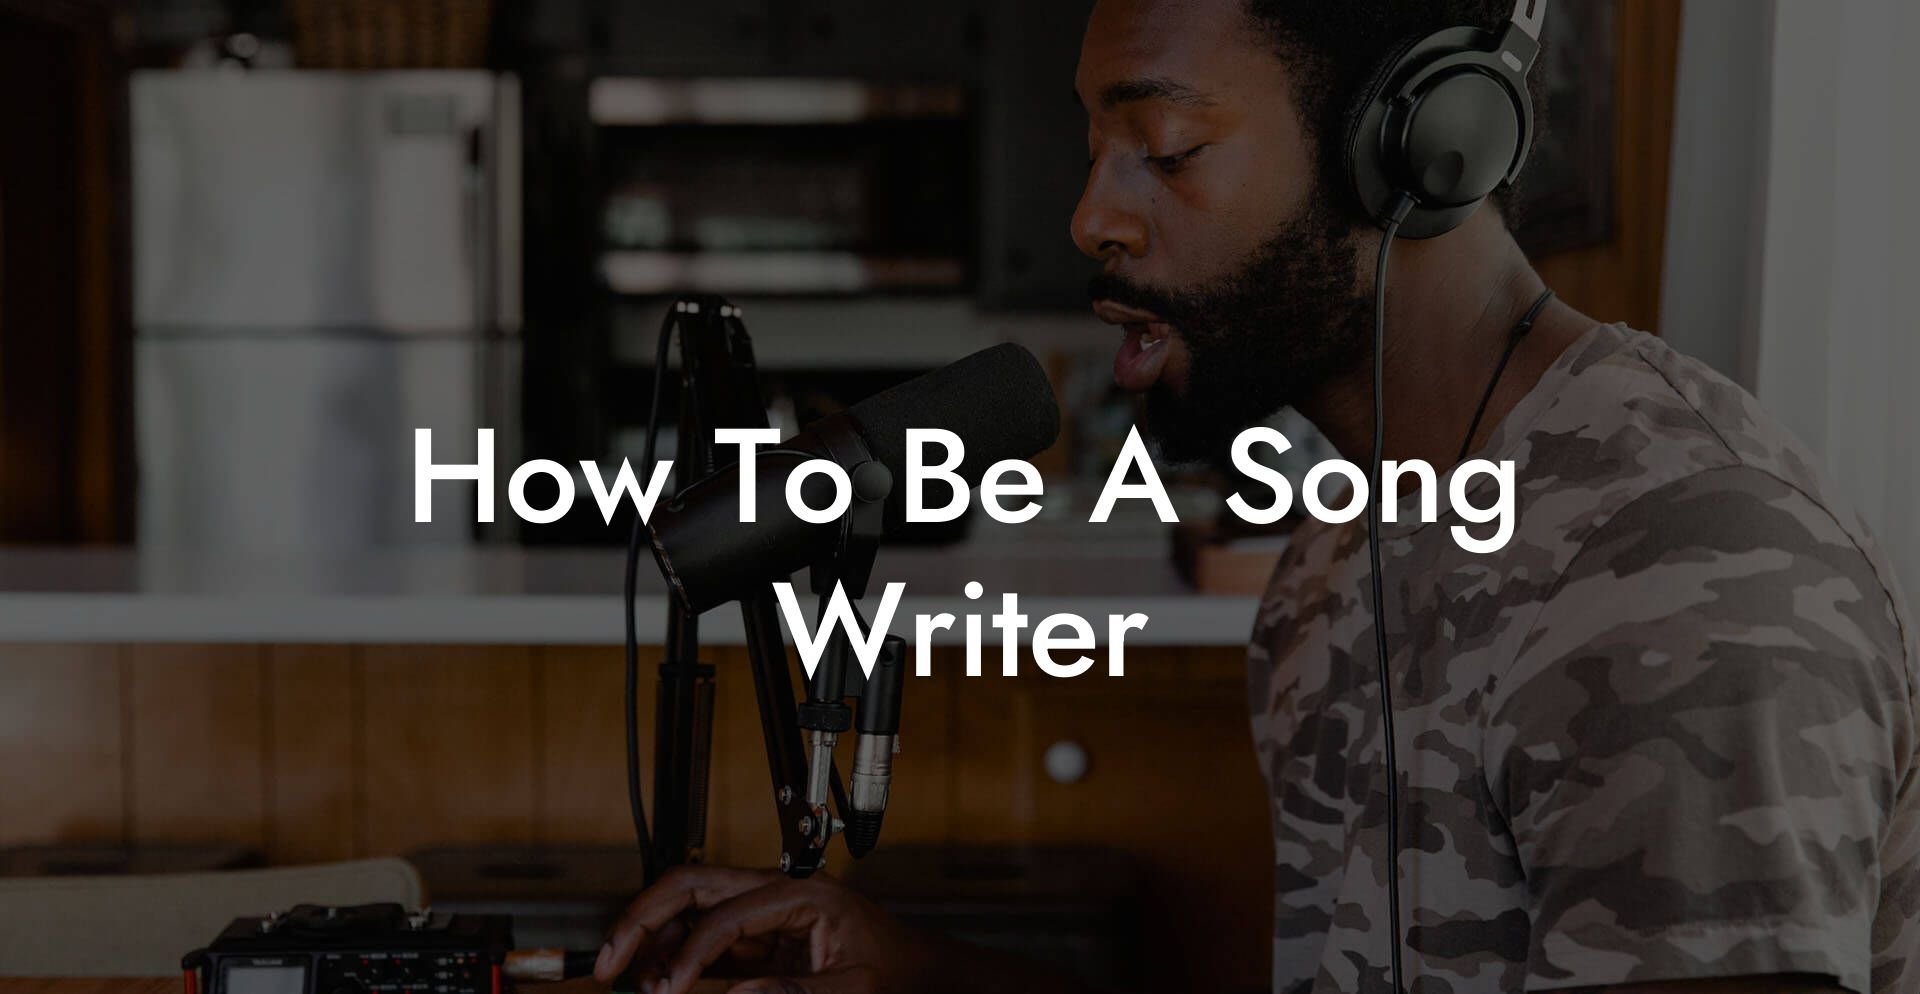 how to be a song writer lyric assistant